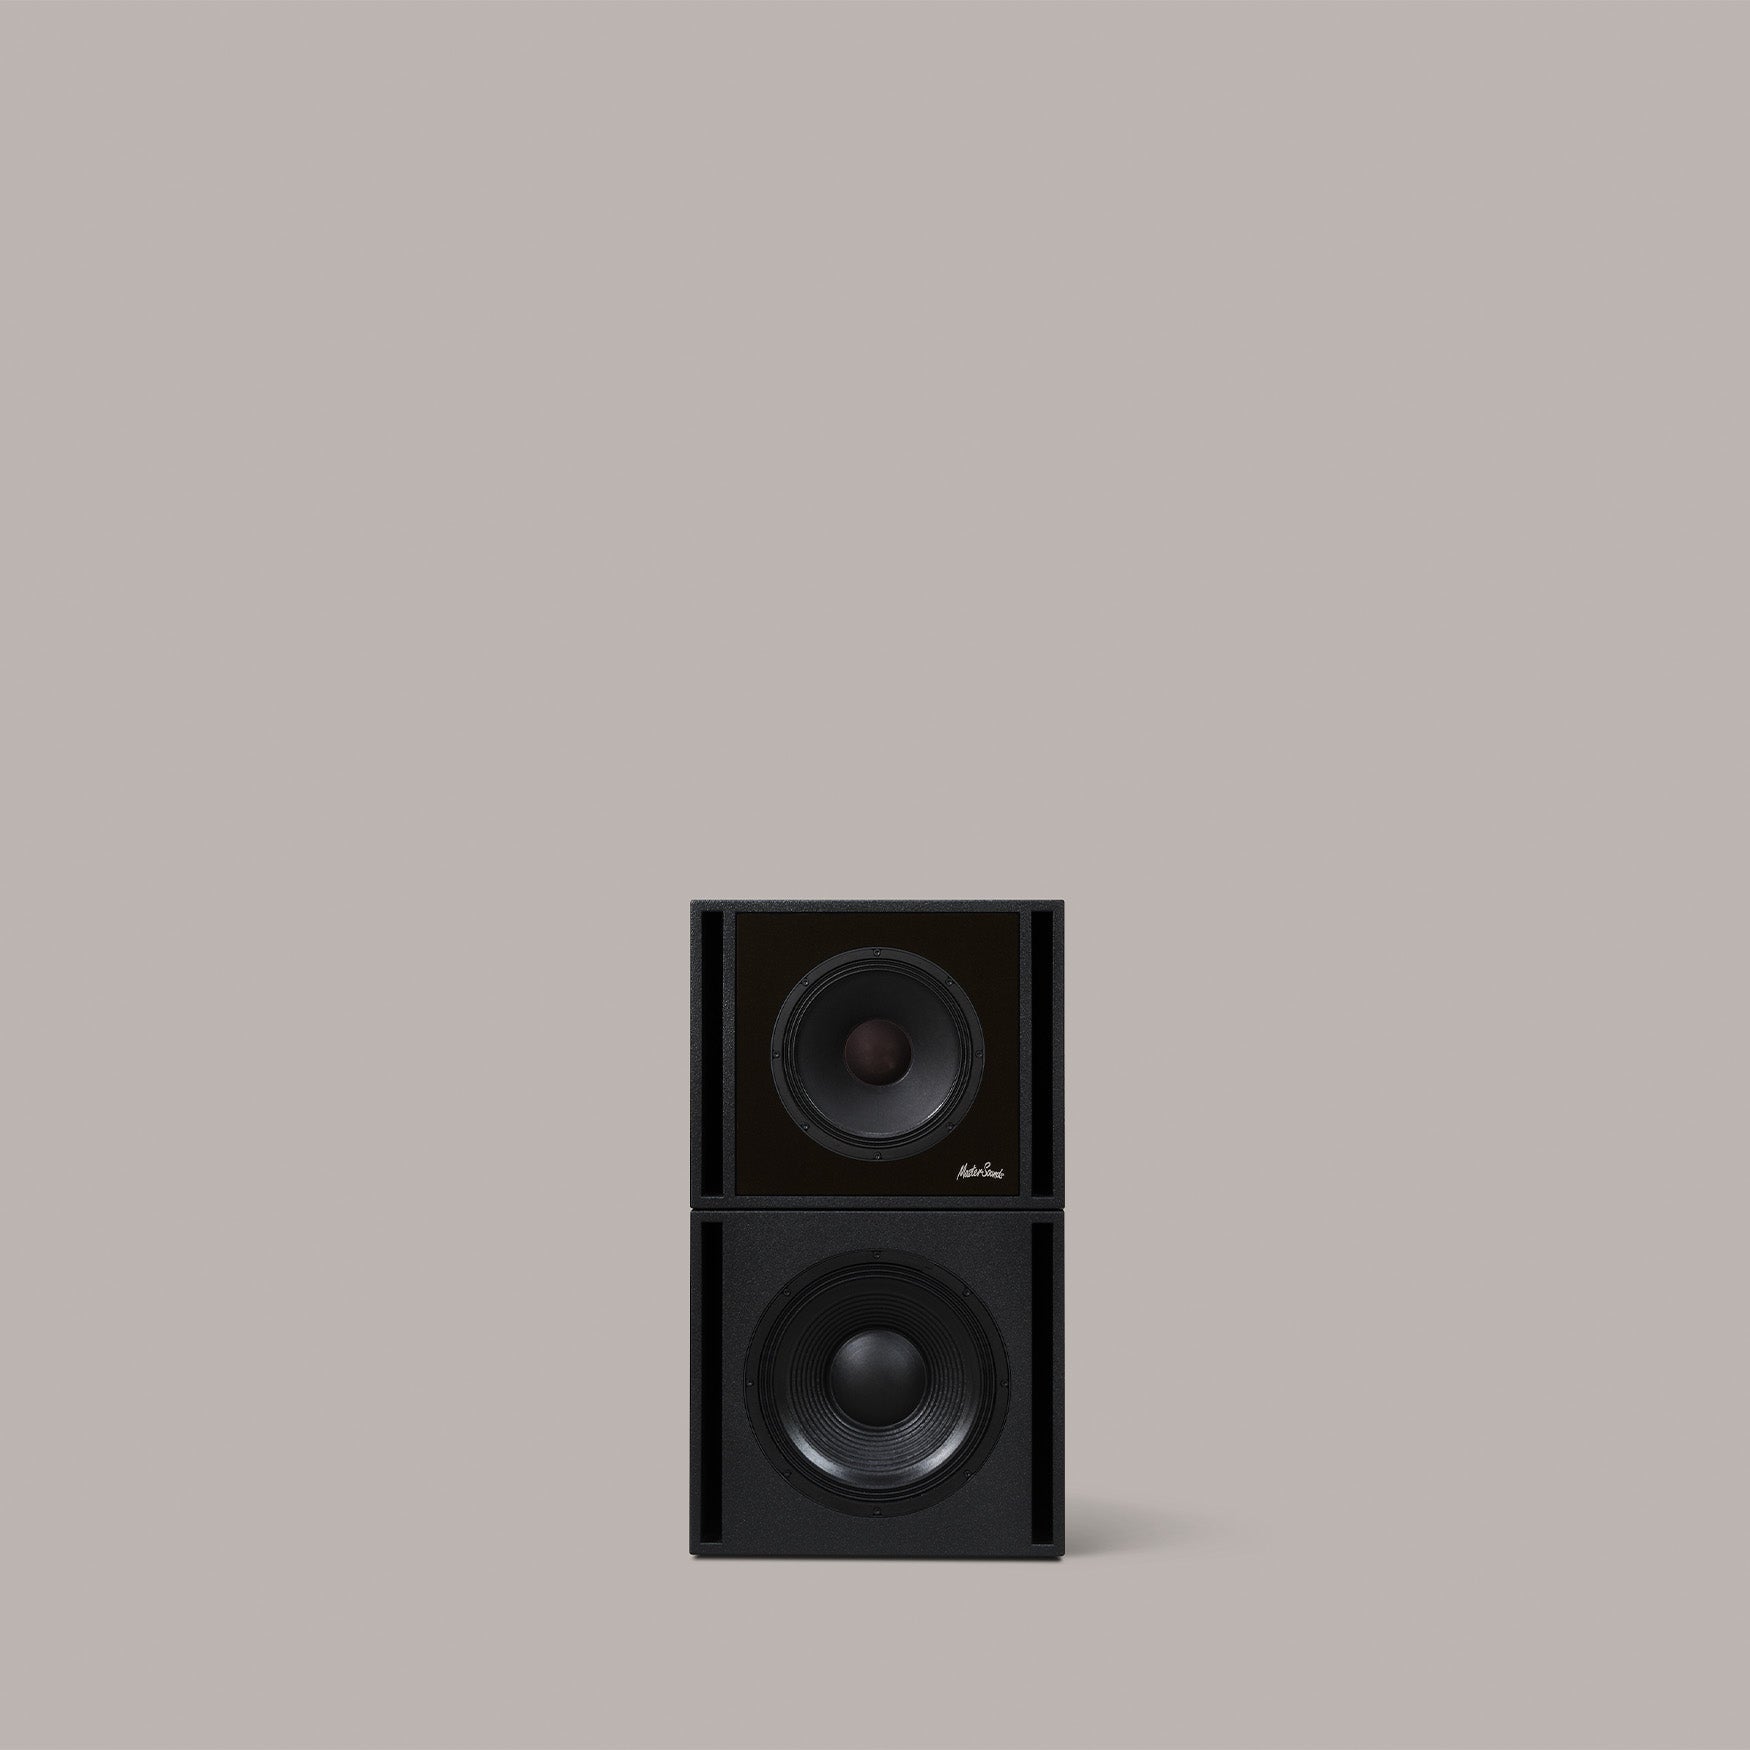 Clarity M Audio System - MasterSounds